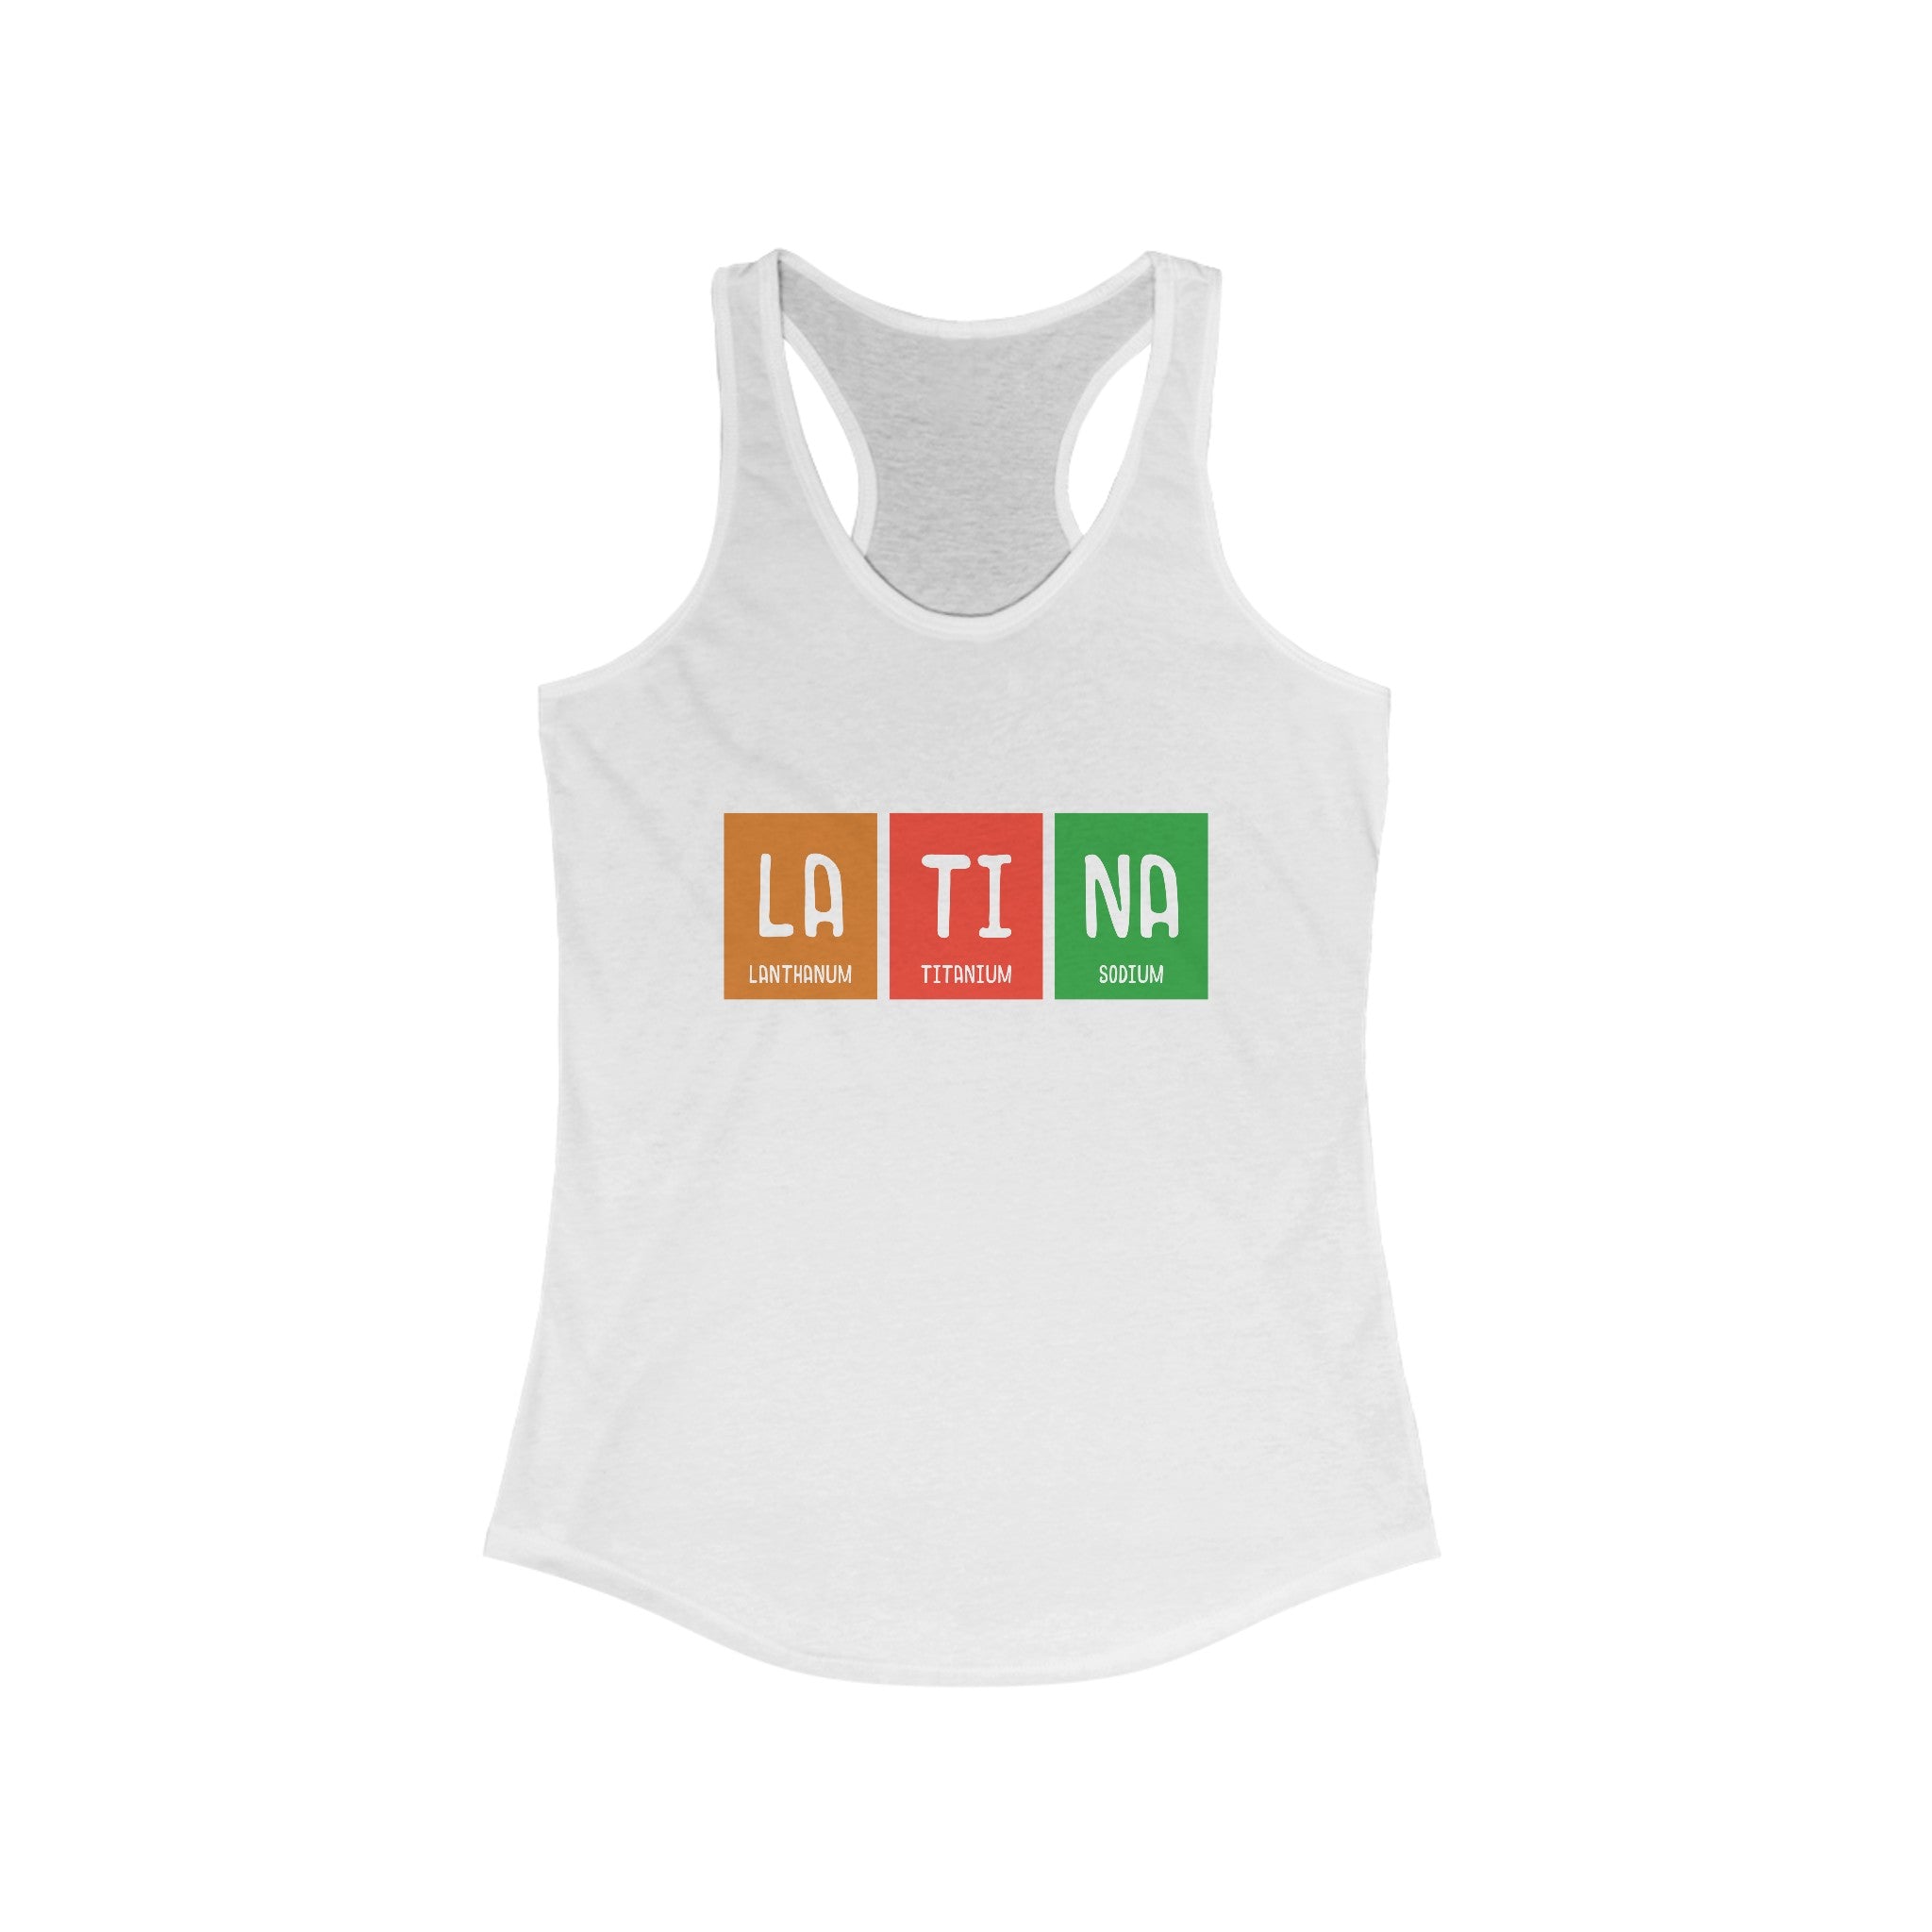 LA-TI-NA - Women's Racerback Tank featuring "LA TI NA" spelled out using colorful periodic table element symbols for Lanthanum, Titanium, and Sodium. Perfect for an active lifestyle and showing off your LA-TI-NA pride.